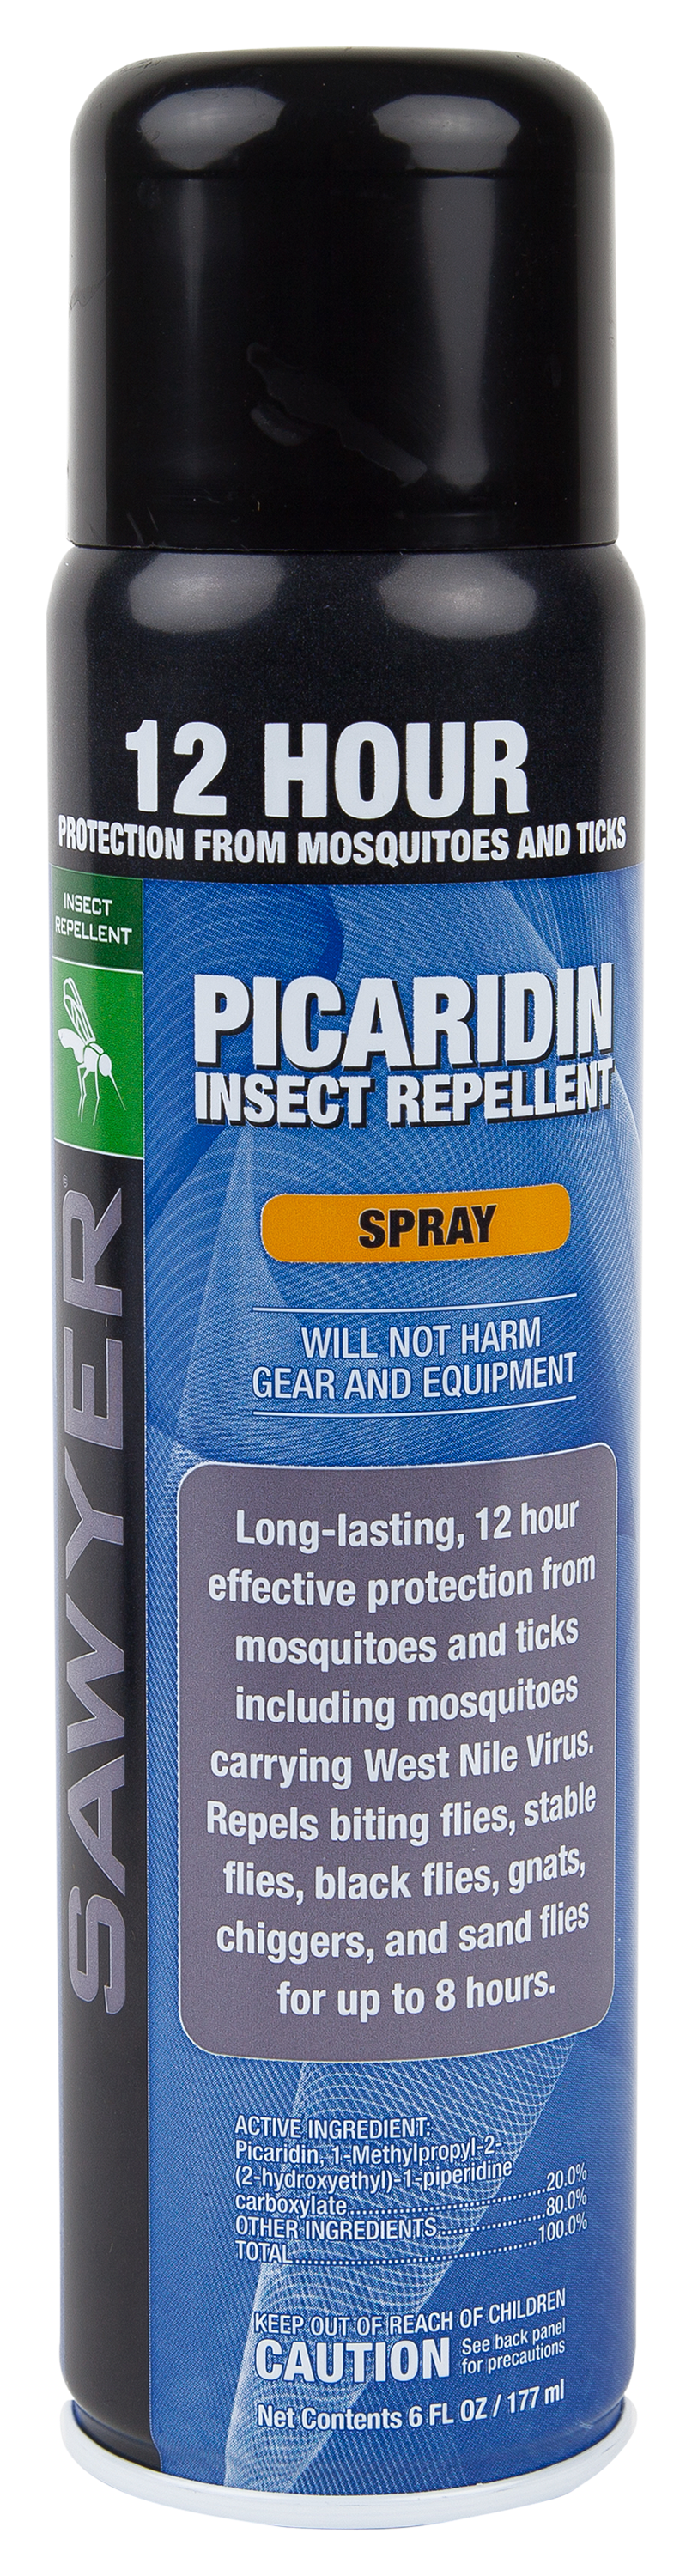 Sawyer Picaridin Insect Repellent Spray - 6 oz